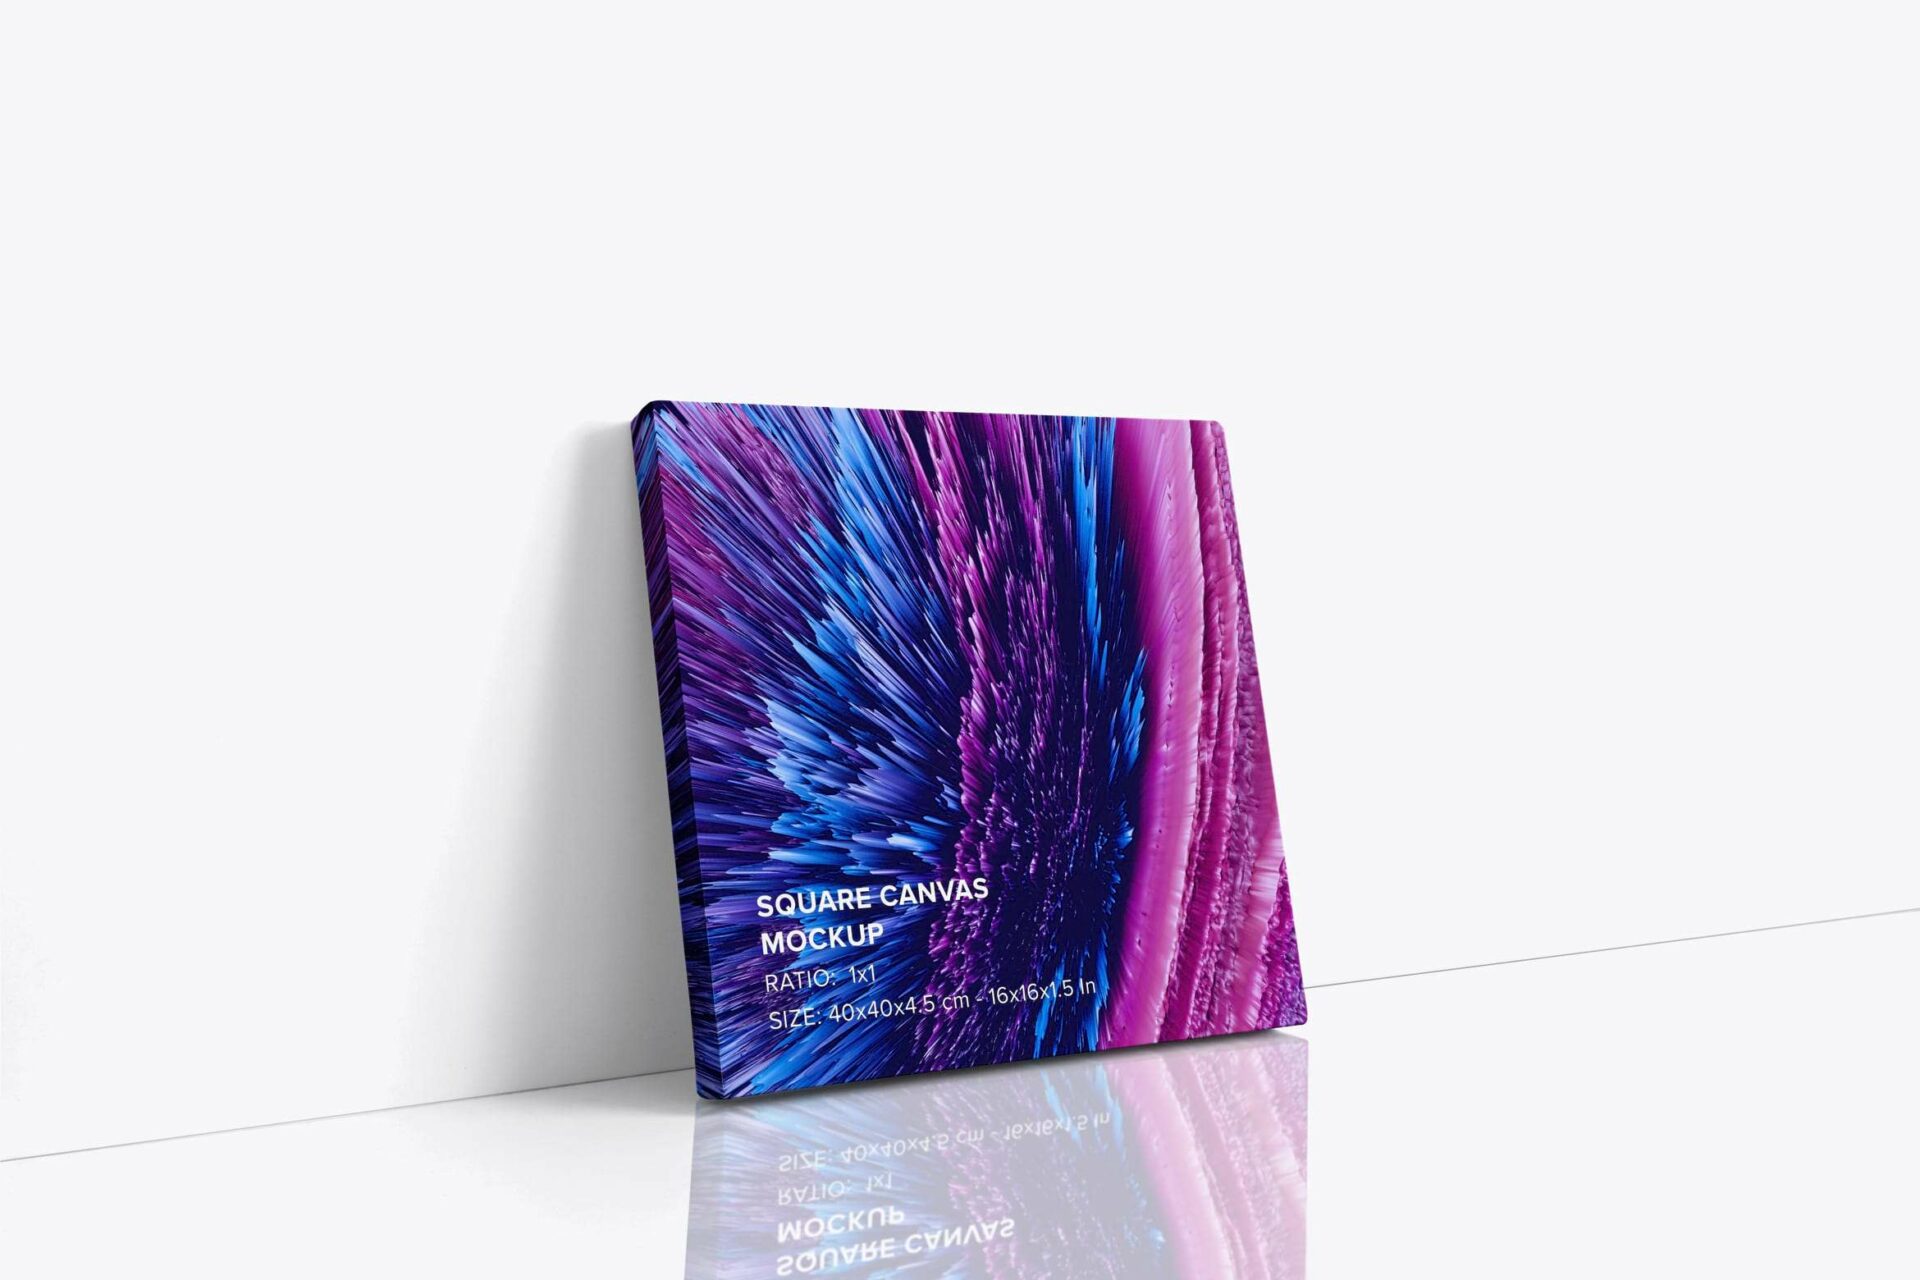 Leaning Square Canvas Ratio 1x1 Mockup - Left 1.5 In Wrap